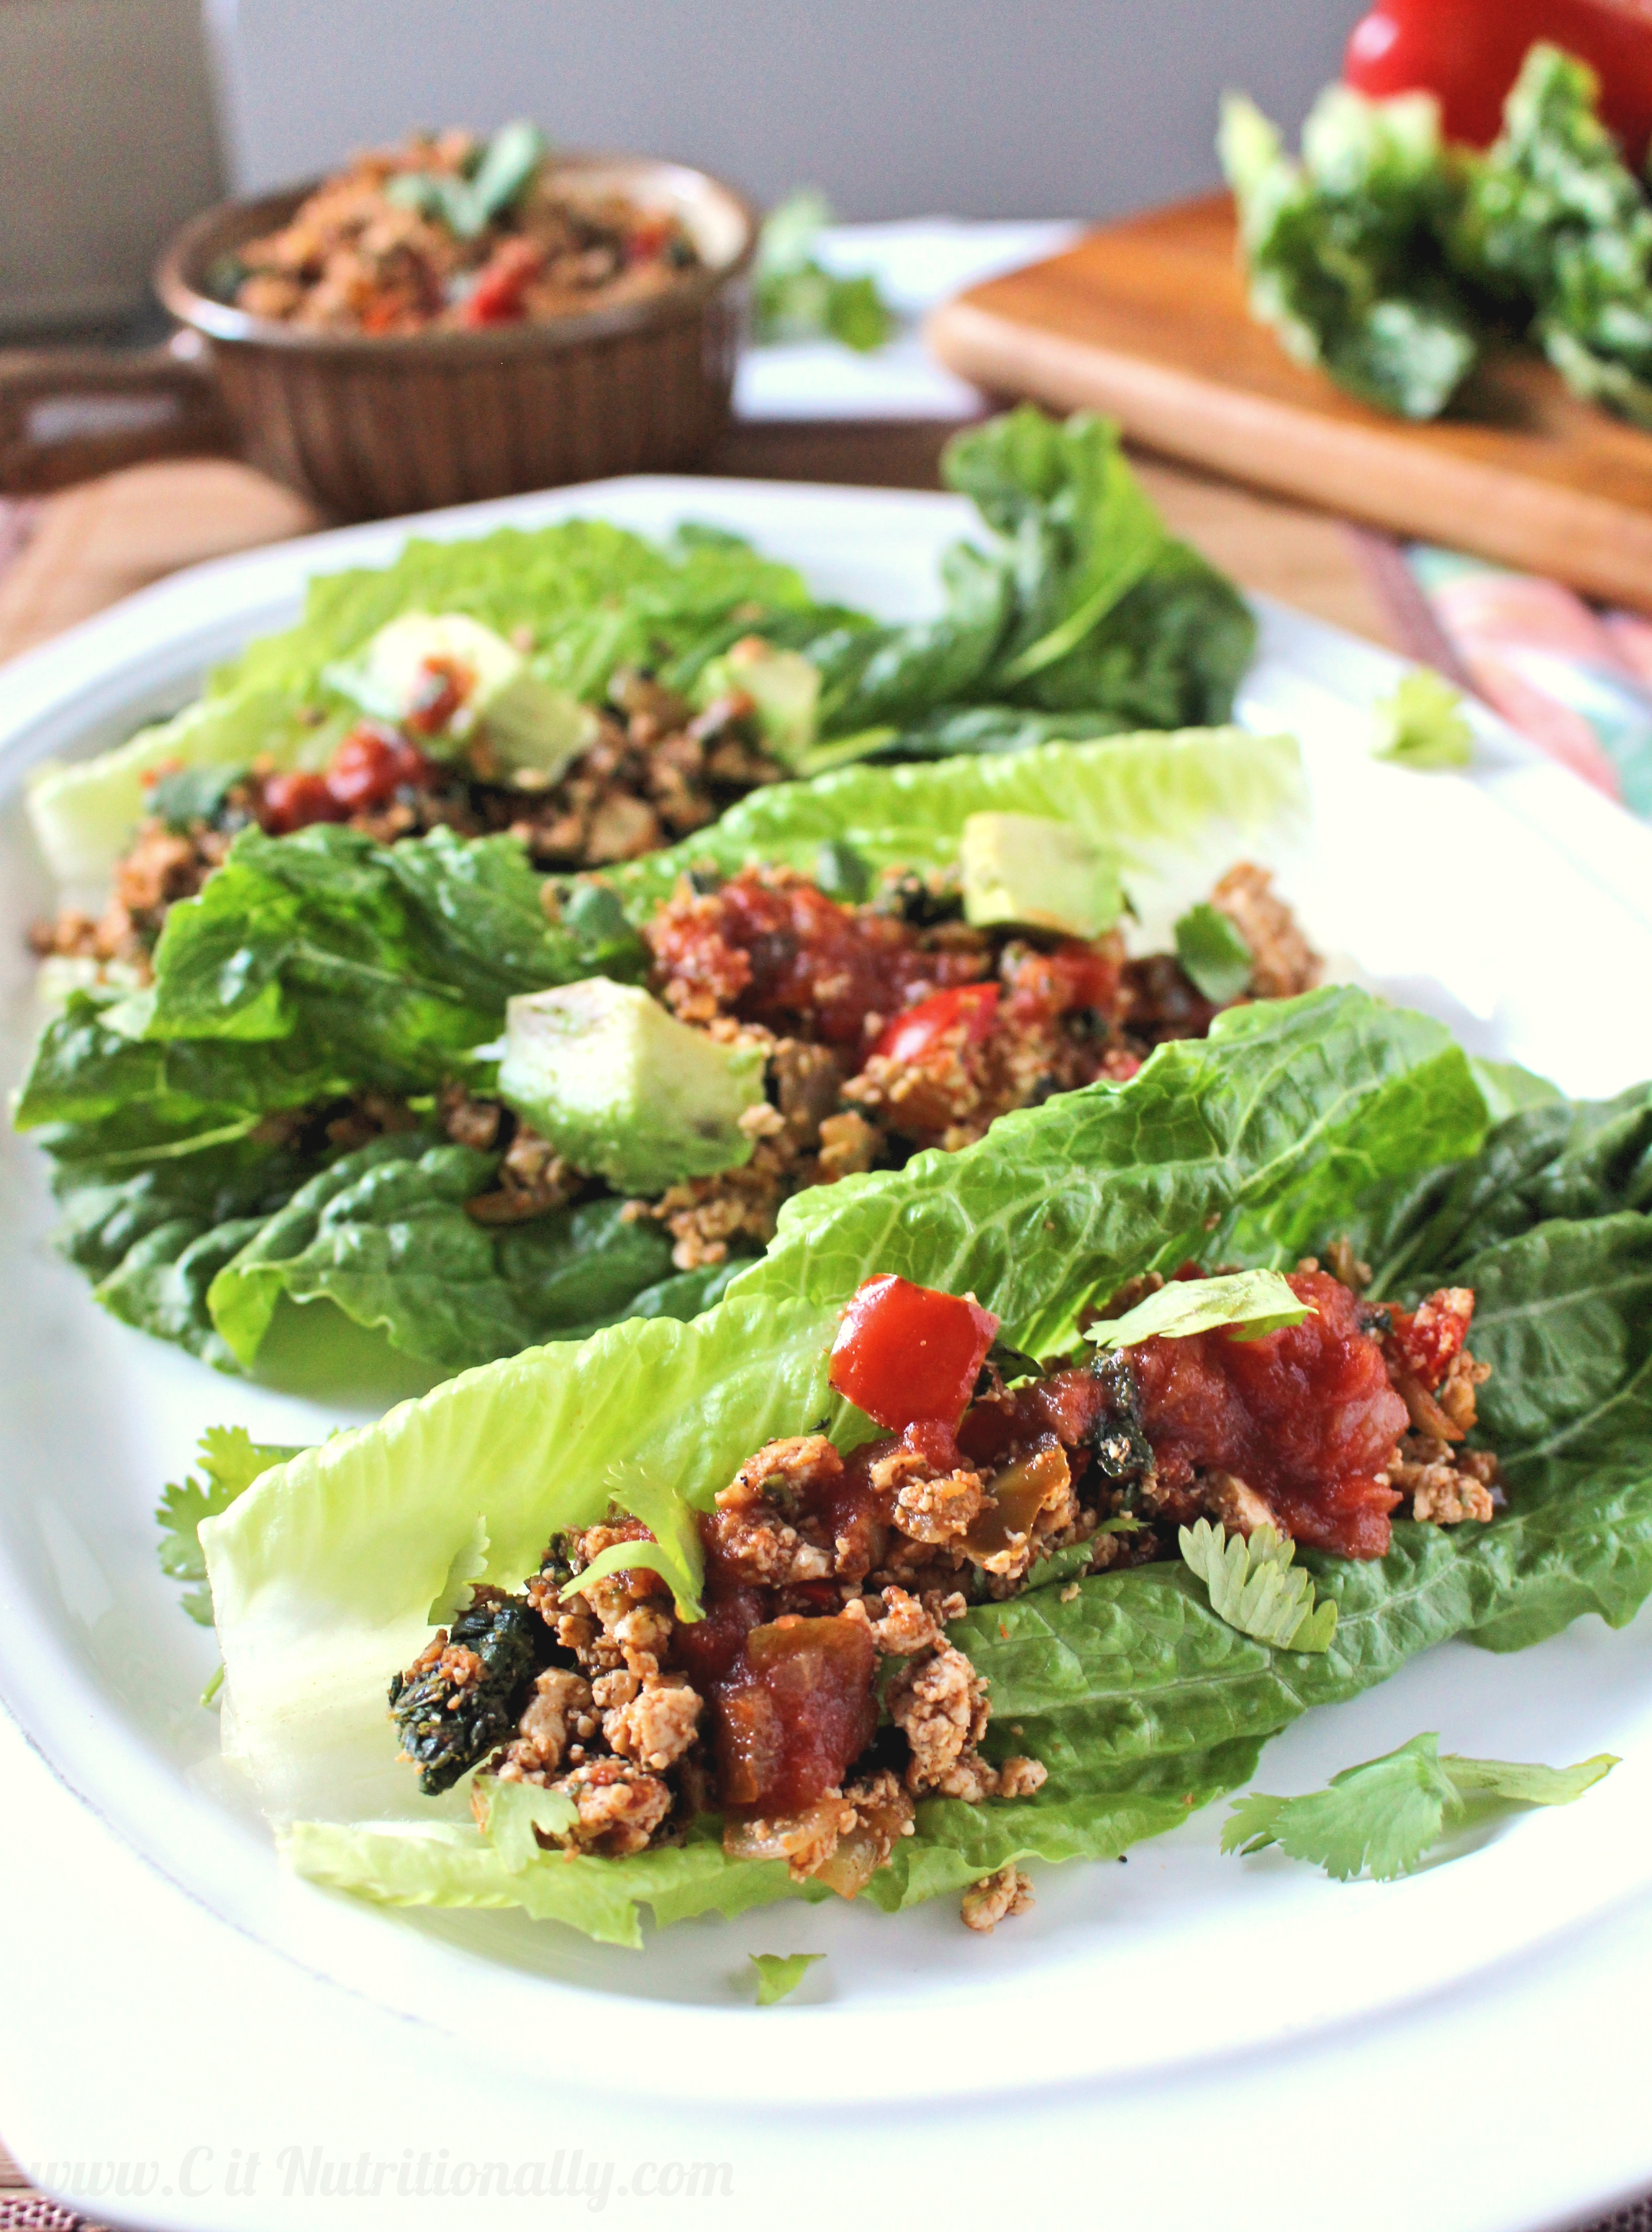 http://chelseyamernutrition.com/wp-content/uploads/2015/12/Tofu-Tacos-in-Lettuce-Cups-C-it-Nutritionally-3.jpg